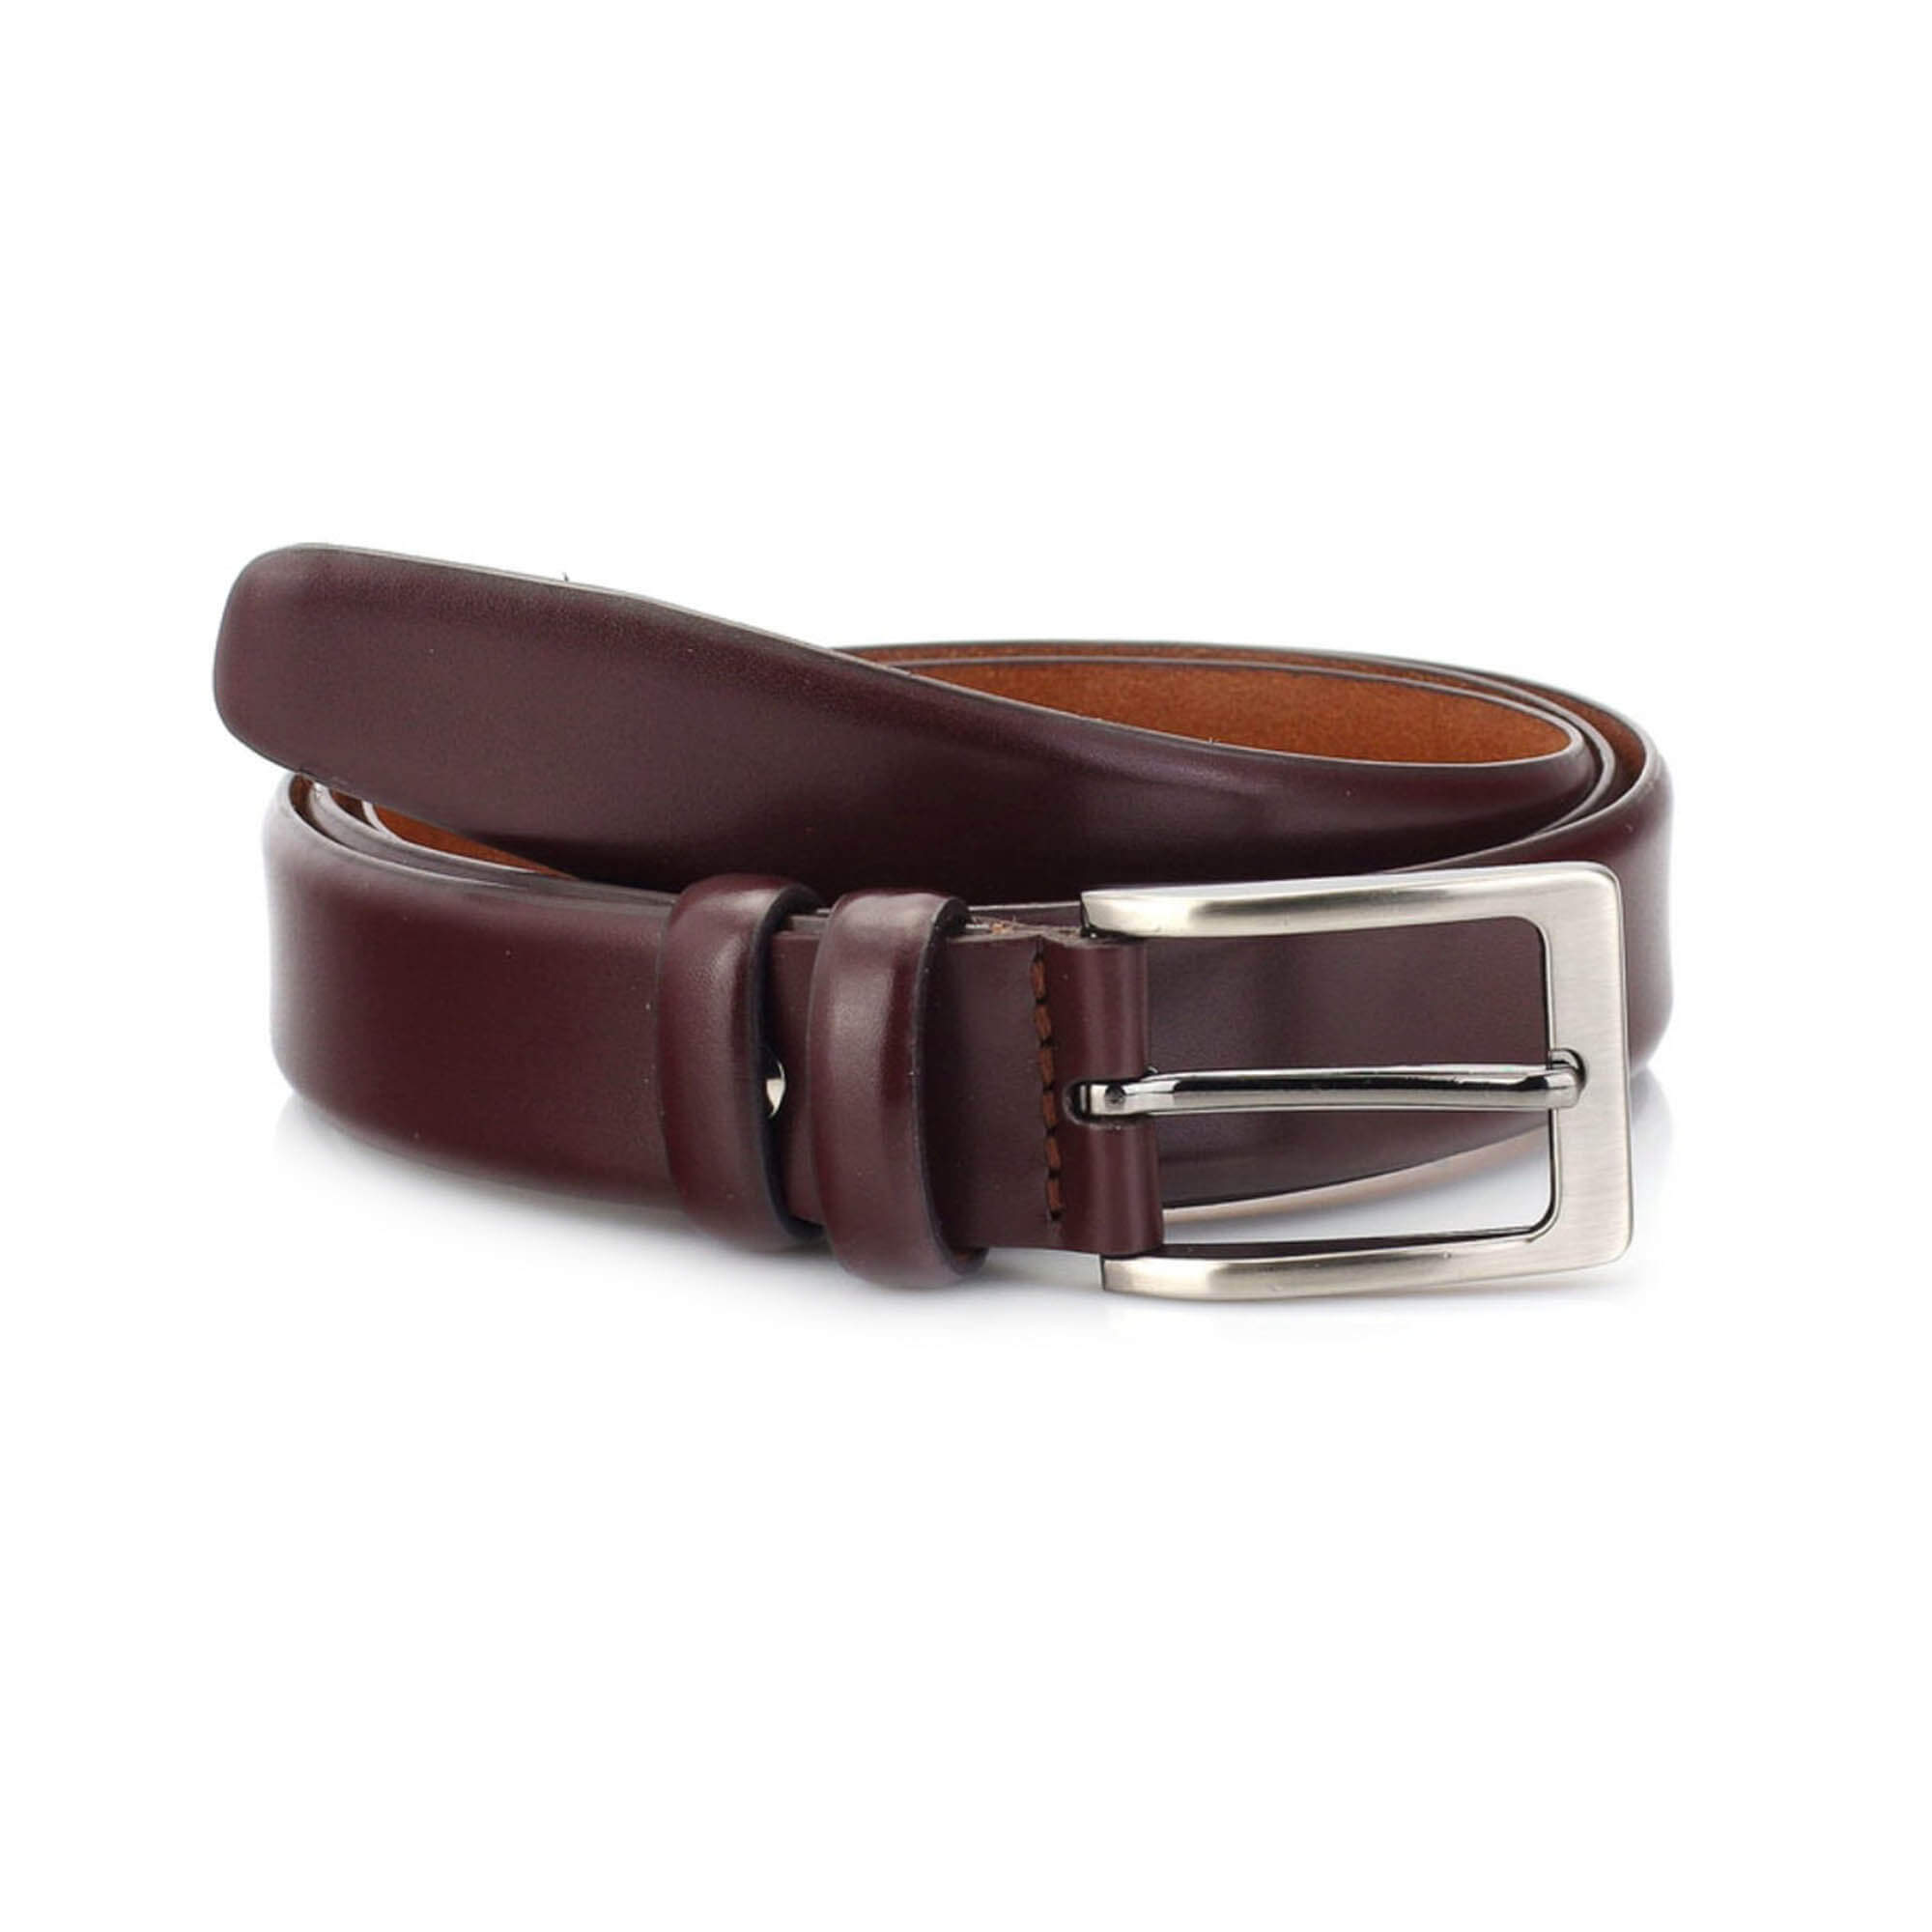 Buy Mens Burgundy Belt For Suit - Real Leather 1 1/8 Inch